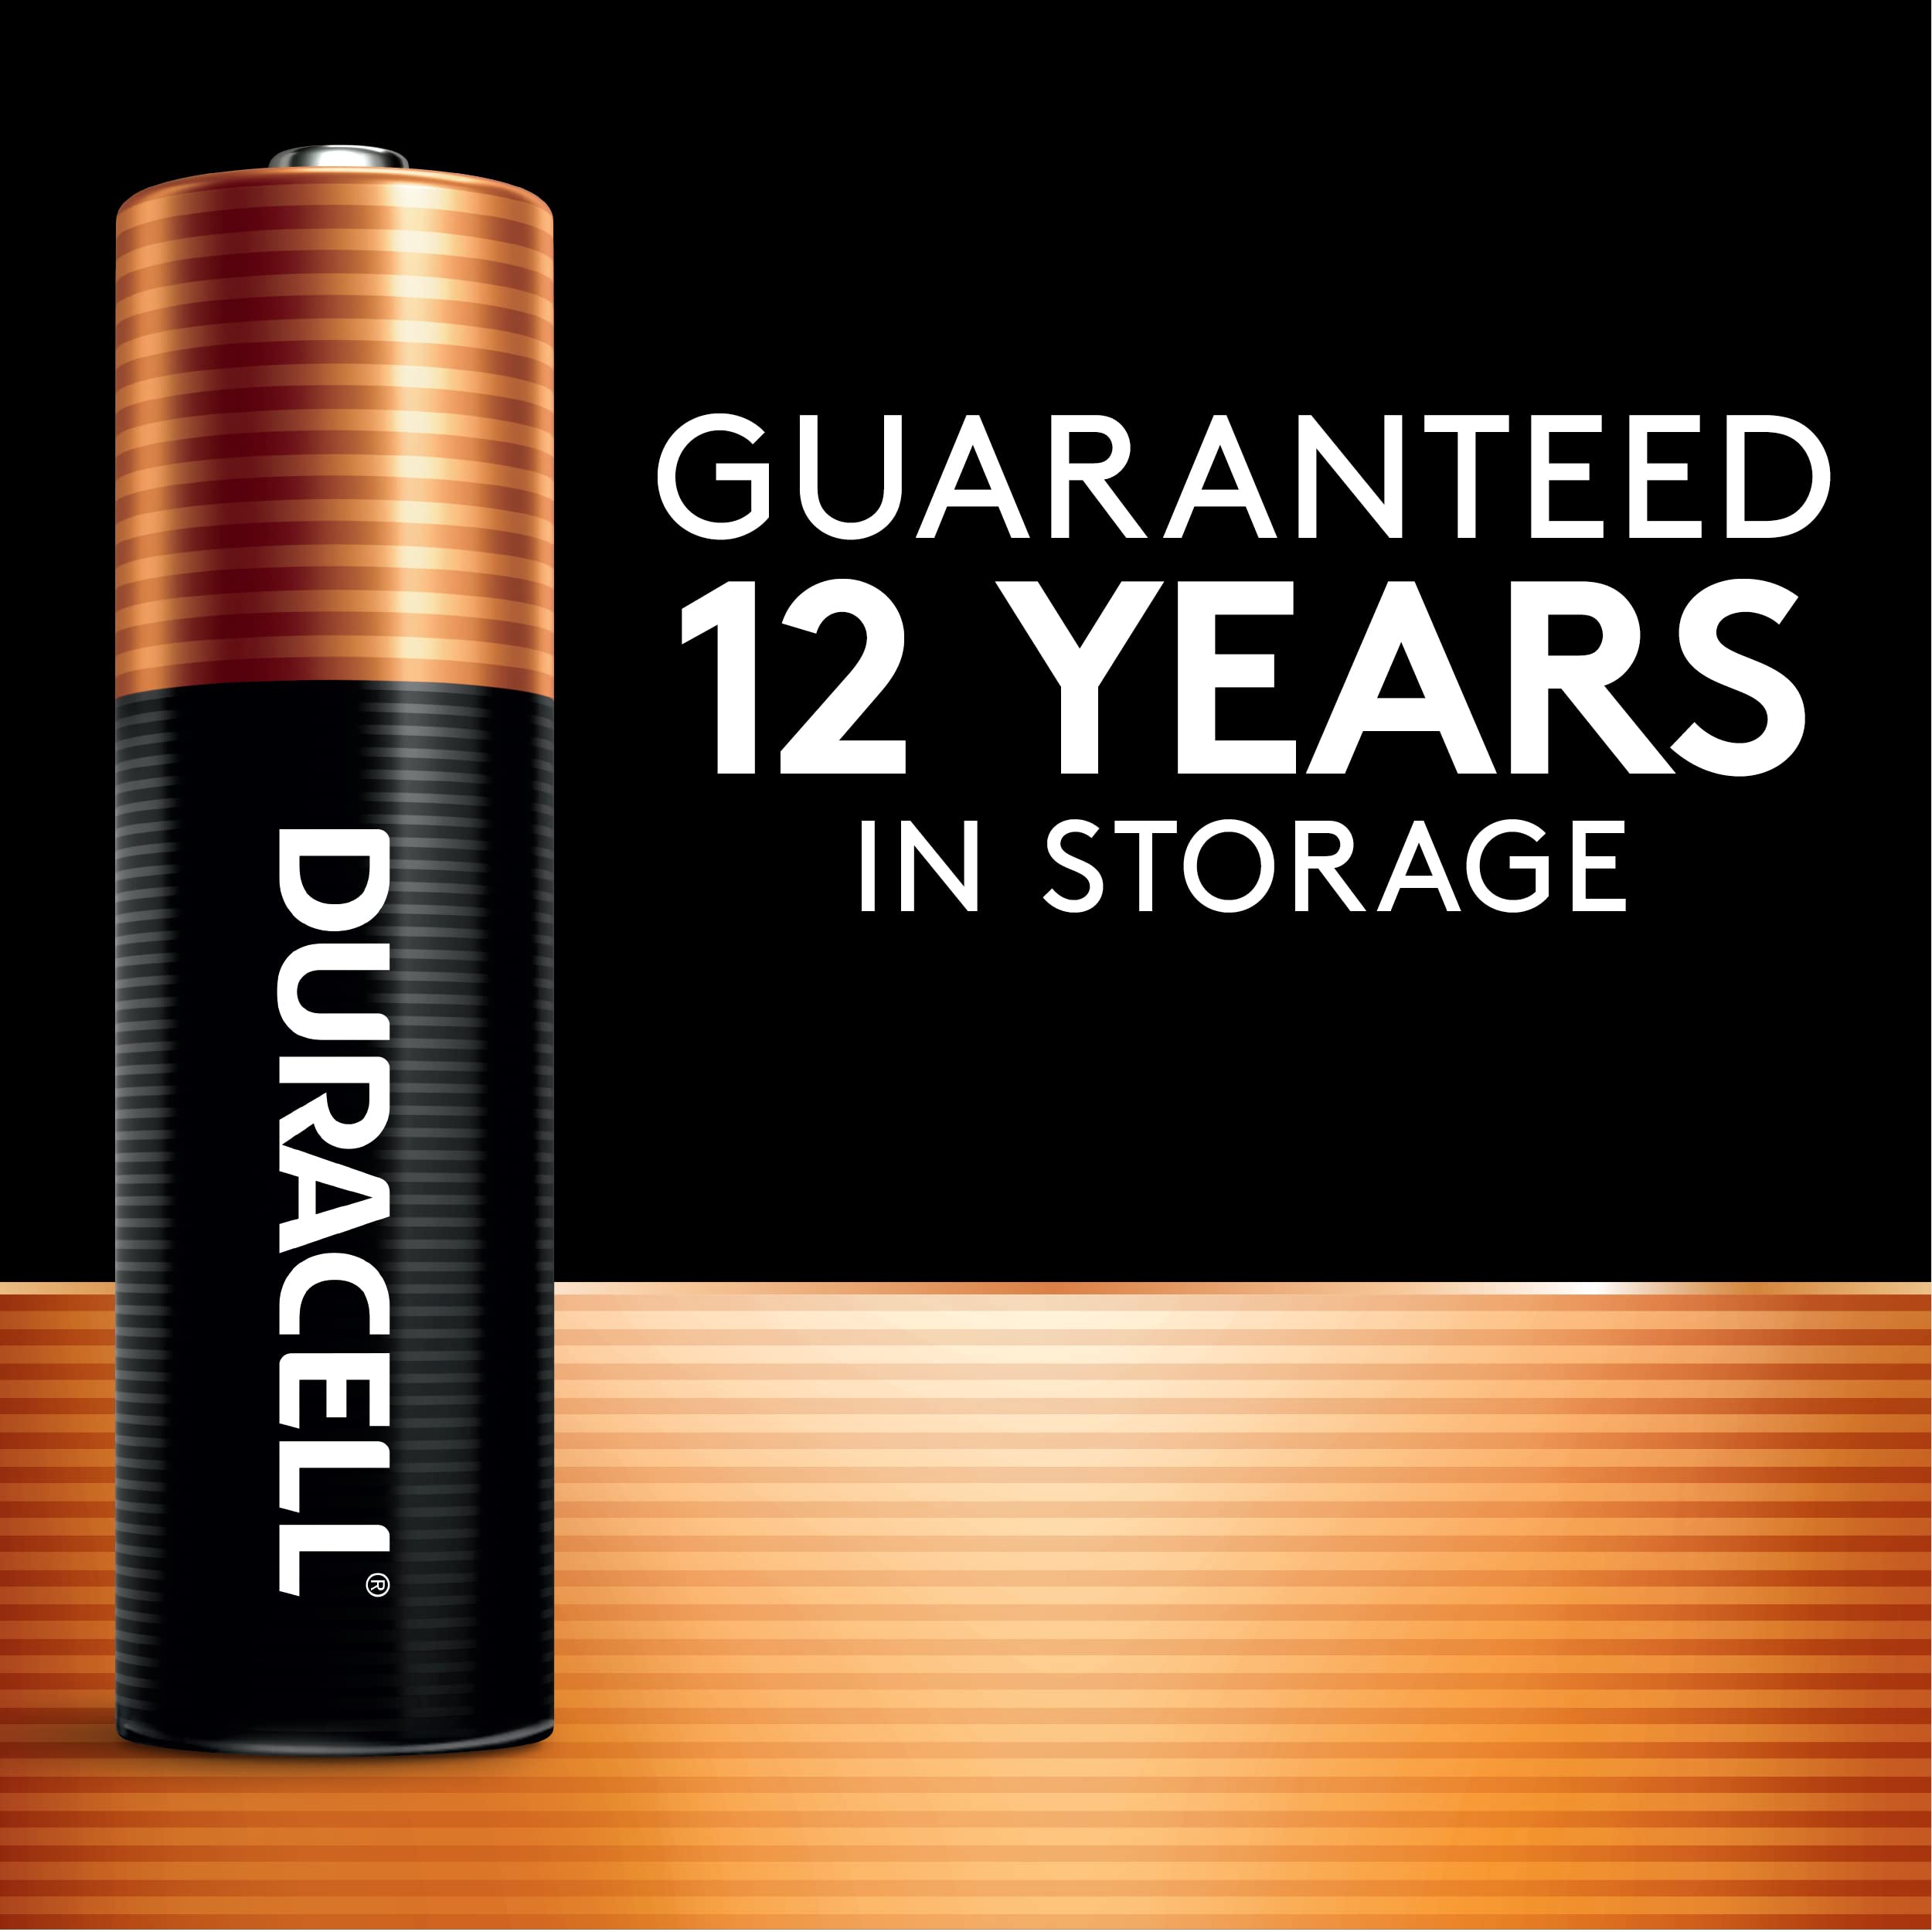 Duracell Coppertop AA Batteries with Power Boost Ingredients, 8 Count Pack Double A Battery with Long-lasting Power, Alkaline AA Battery for Household and Office Devices